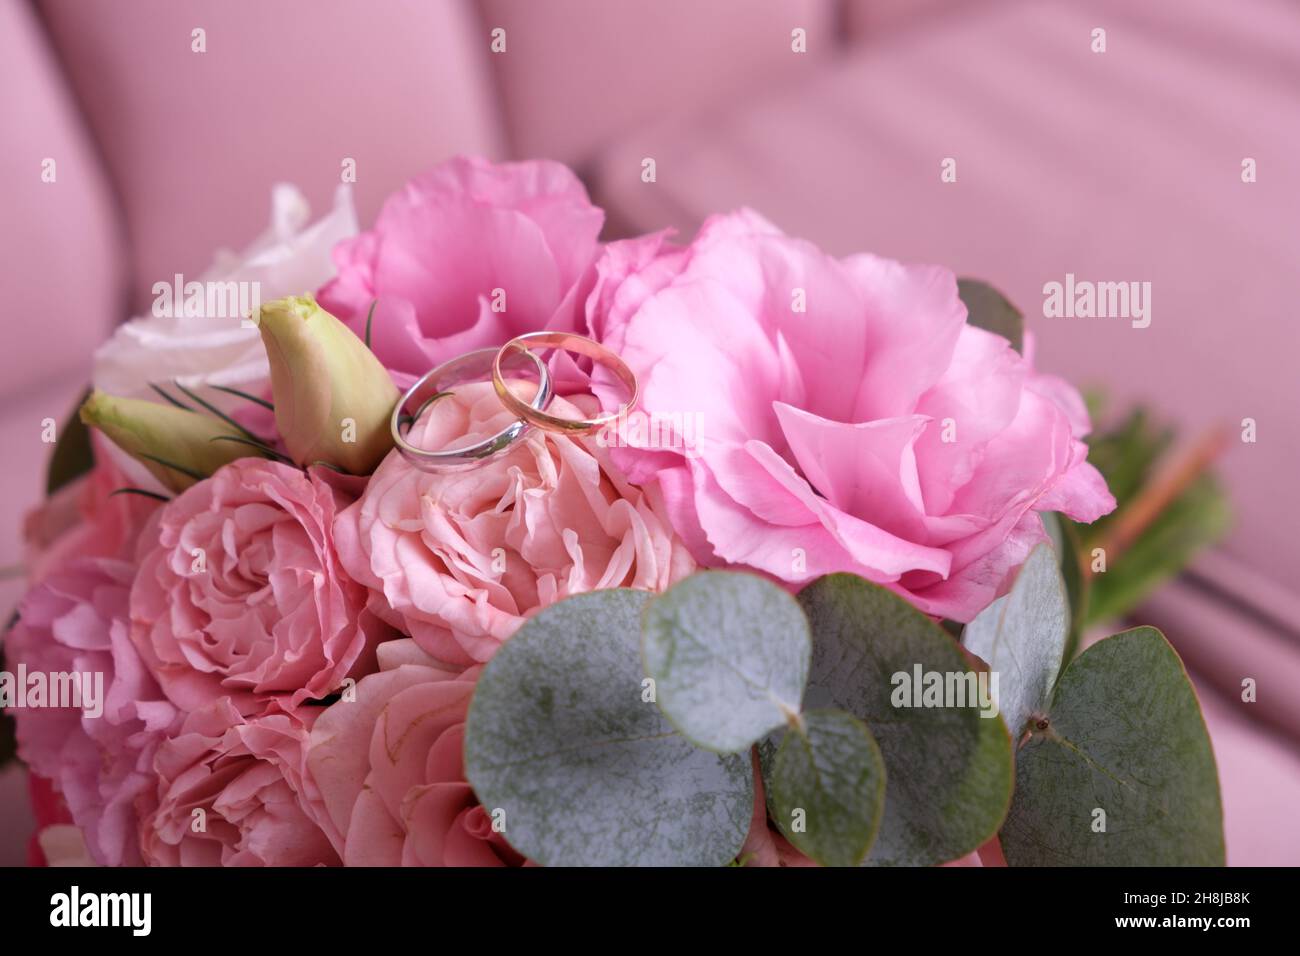 Two wedding rings of white and yellow gold on a bouquet of pink roses. Stock Photo